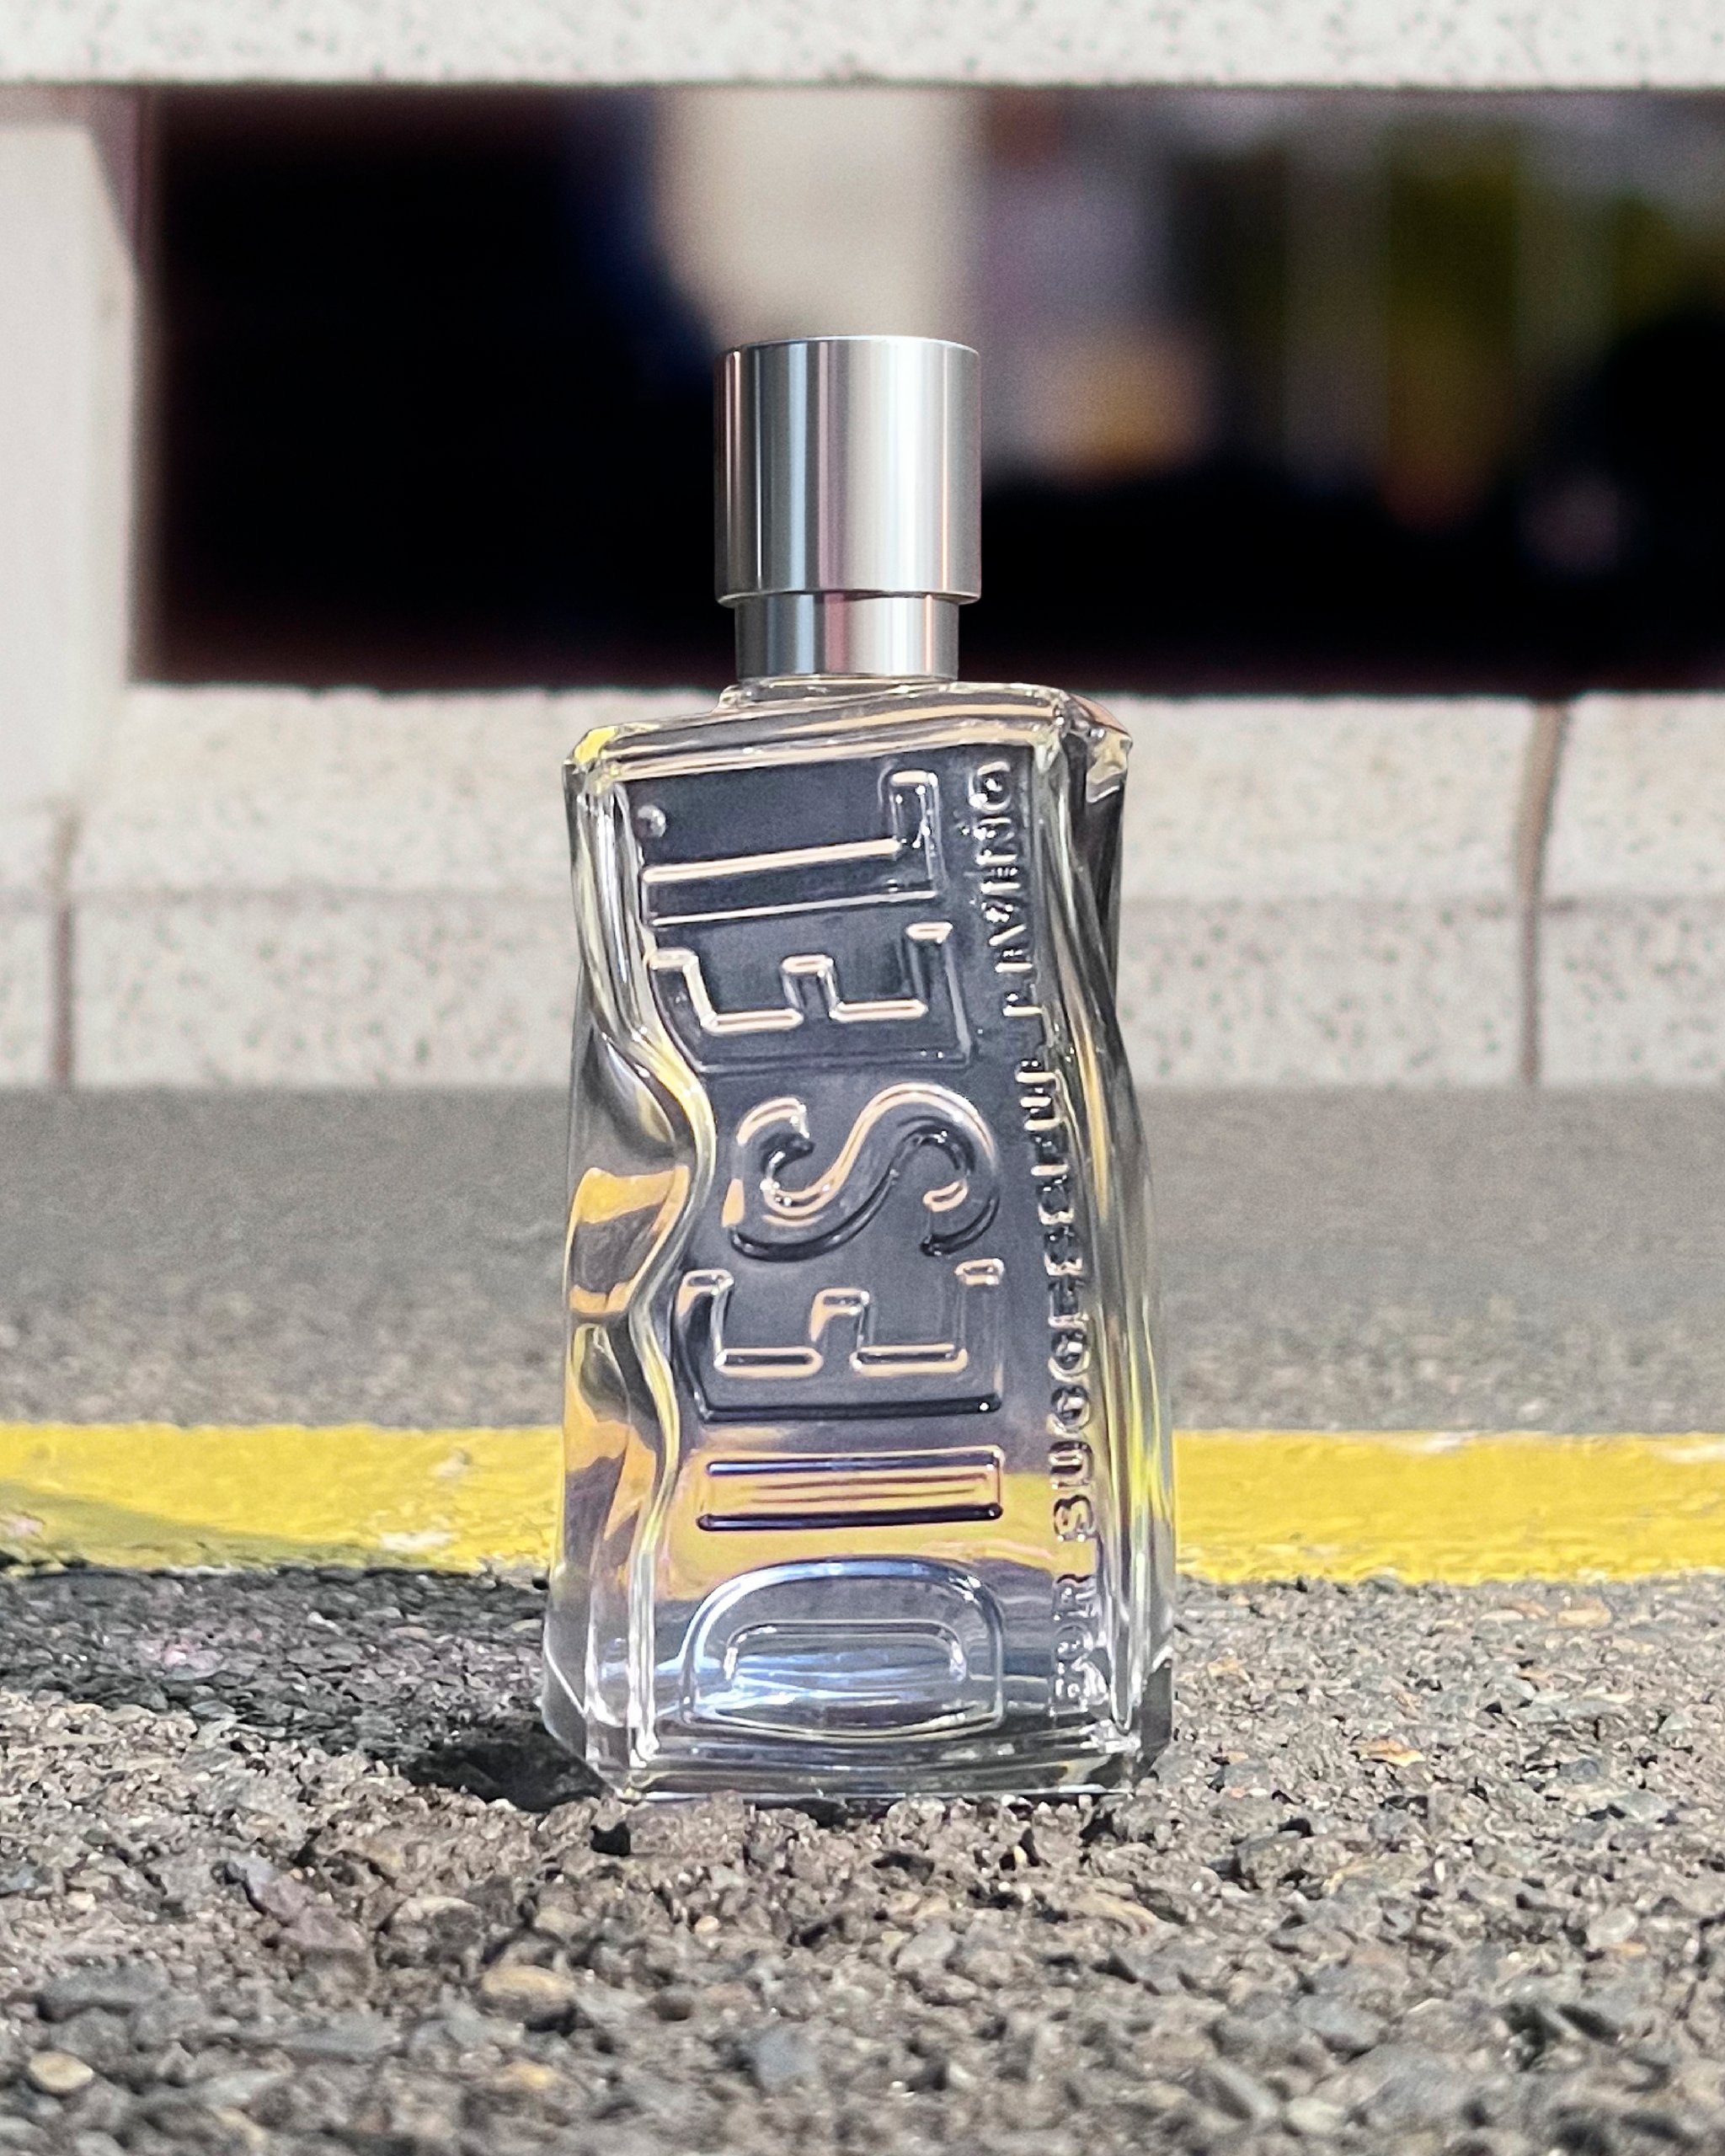 LOW_D-BY-DIESEL---THE-NEW-FRAGRANCE_PRODUCT-GLORIFICATION-STILL-LIFE-_PR-CROPS_DI766_LOREAL-FRAGRANCE-22_DIGITAL-CAMPAIGN_PRODUCT-GLORIFICATION_PR-CROPS_72dpi_04